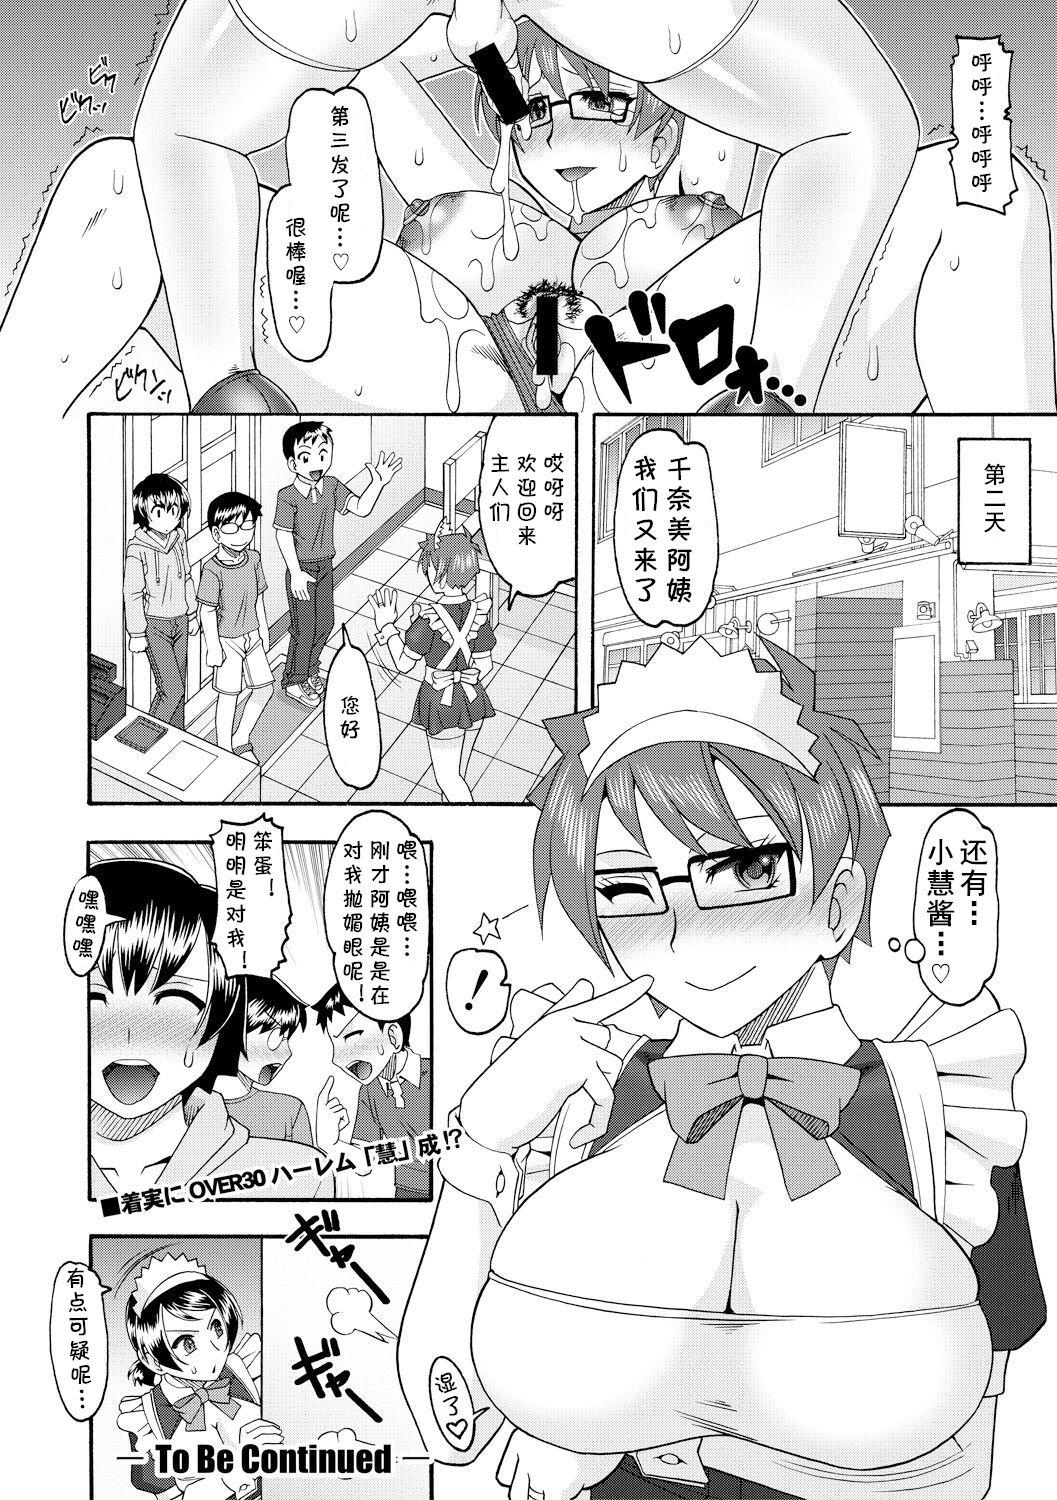 Maid-san OVER 30 Part 2 17